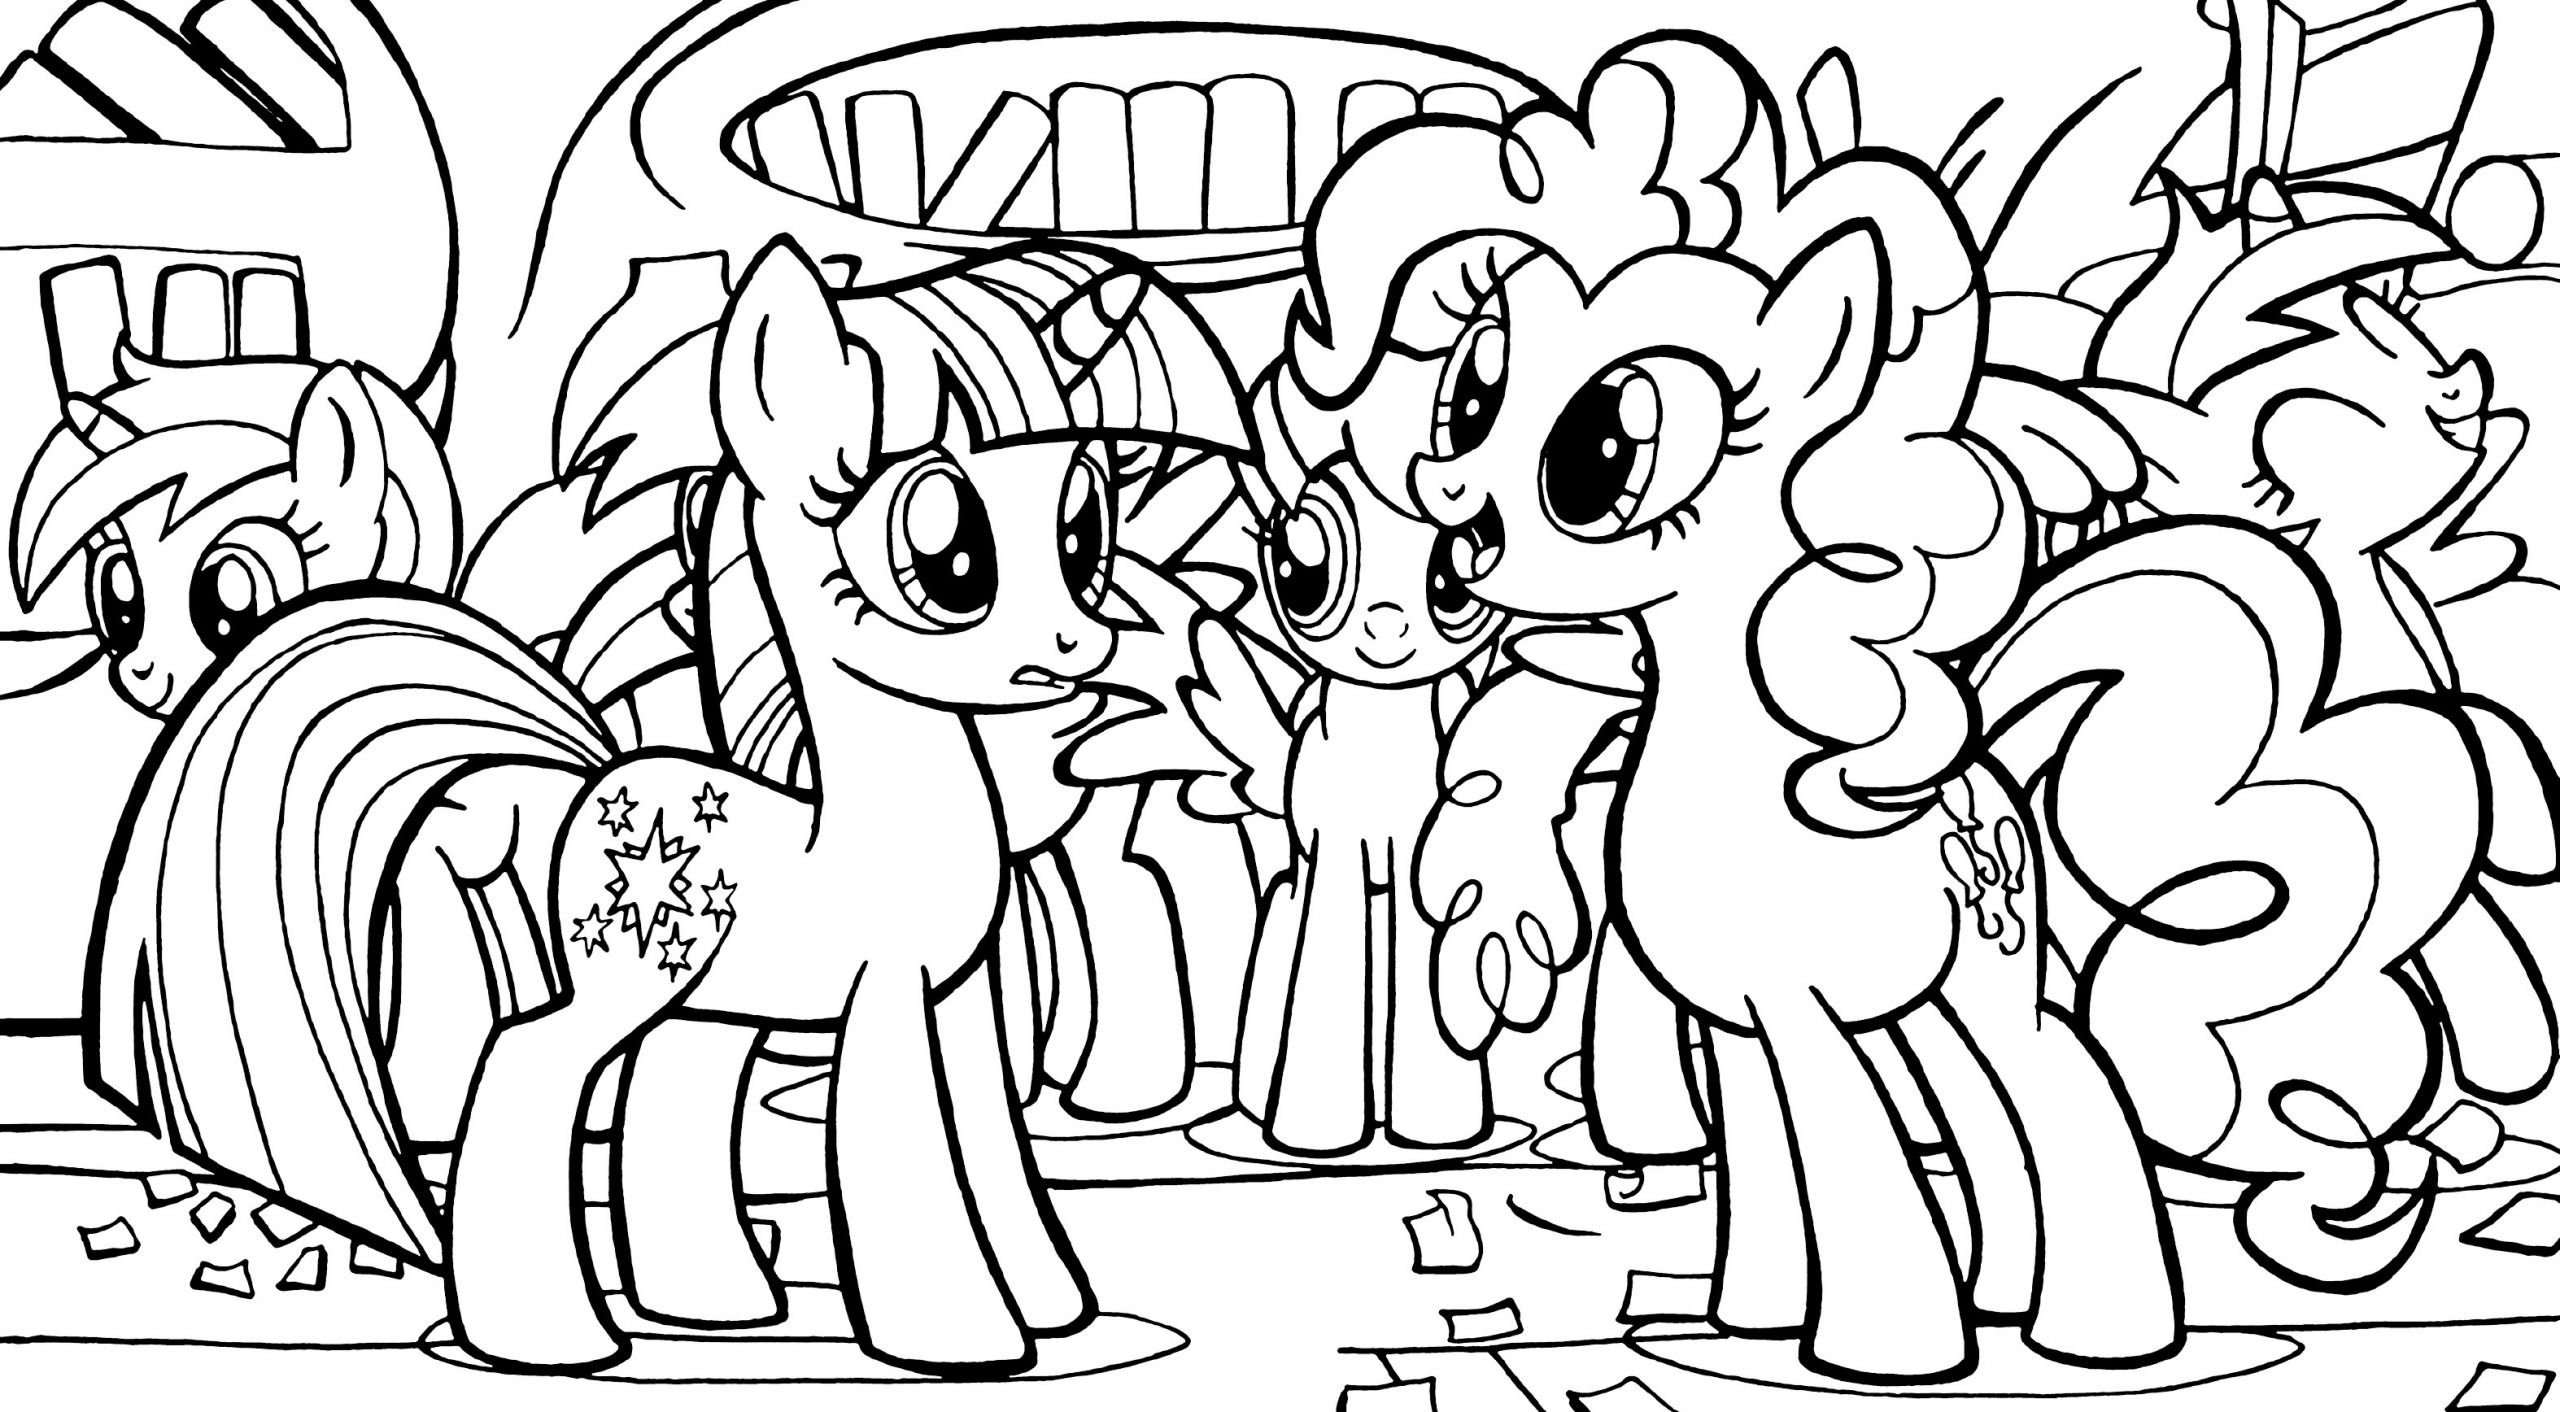 Equestria Girls Pinkie Pie Coloring Pages
 Pinkie Pie pony coloring pages for girls to print for free